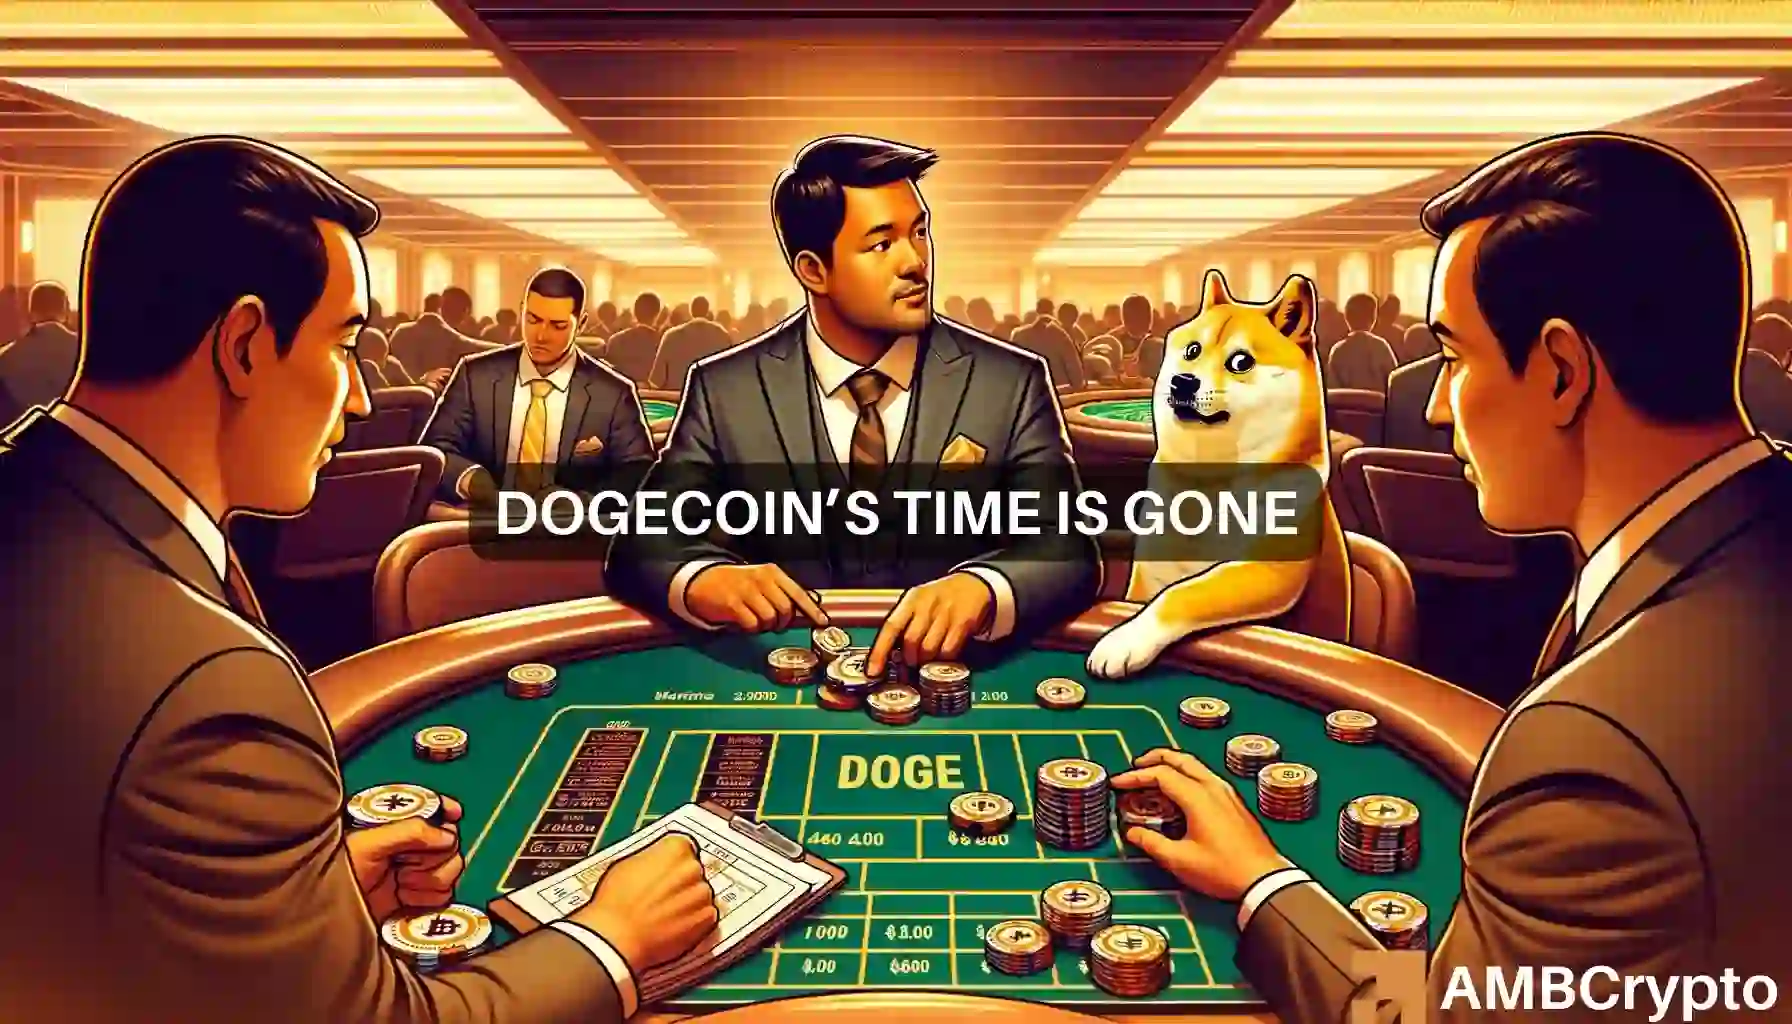 Dogecoin: As bearish bets rise, will DOGE crash to $0.10 again?